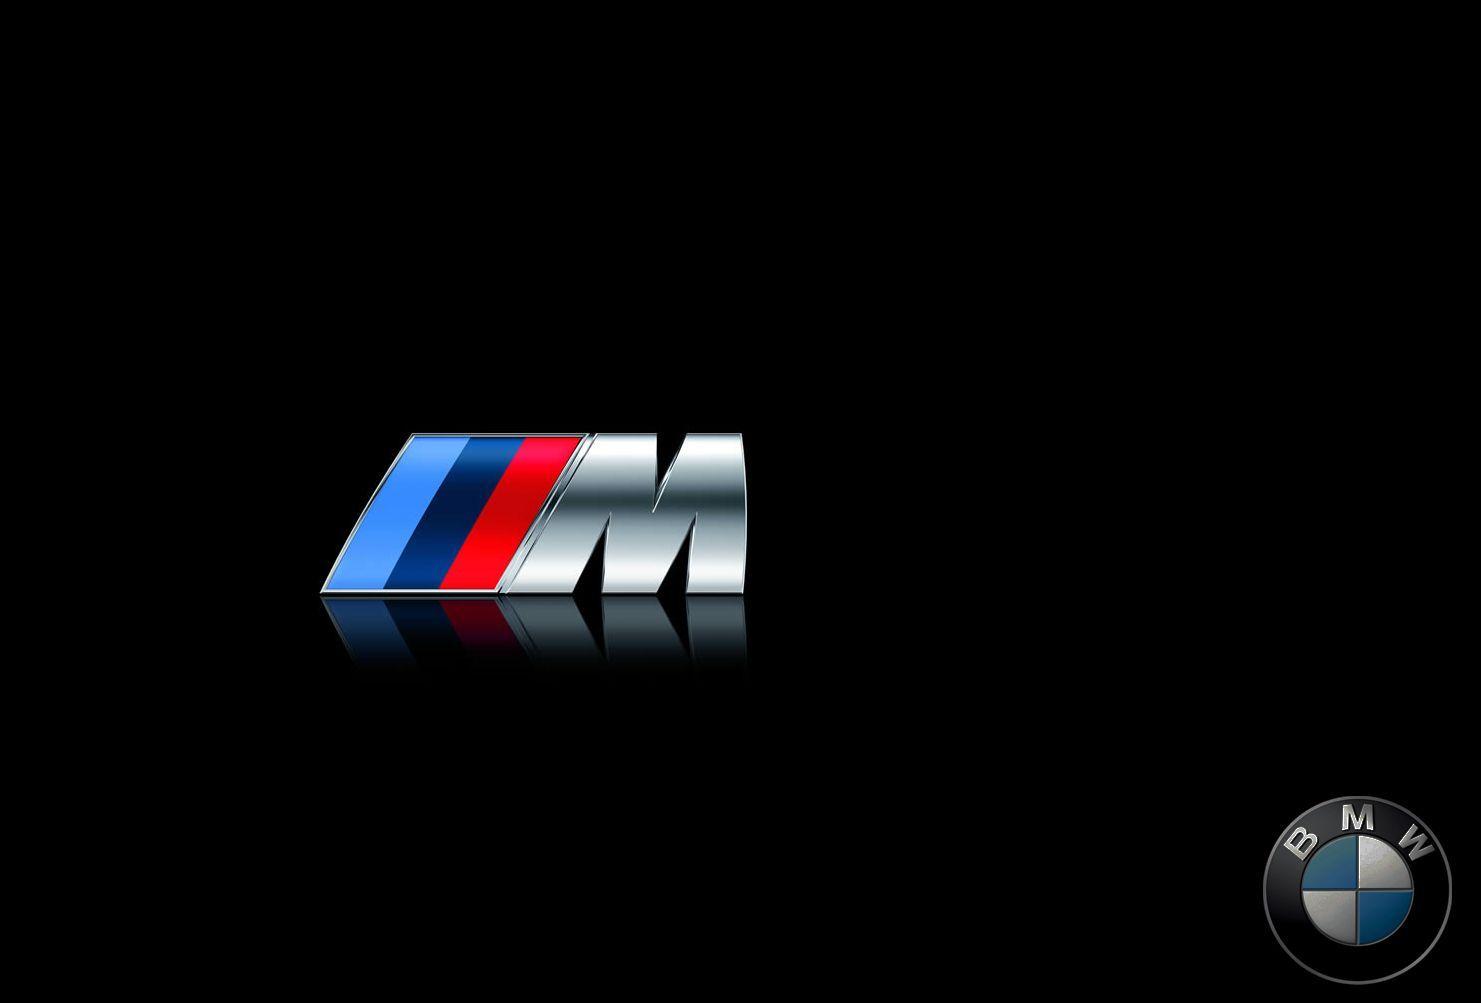 BMW M Division Logo - BMW COULD INTRO NEW M MODELS - IN4RIDE